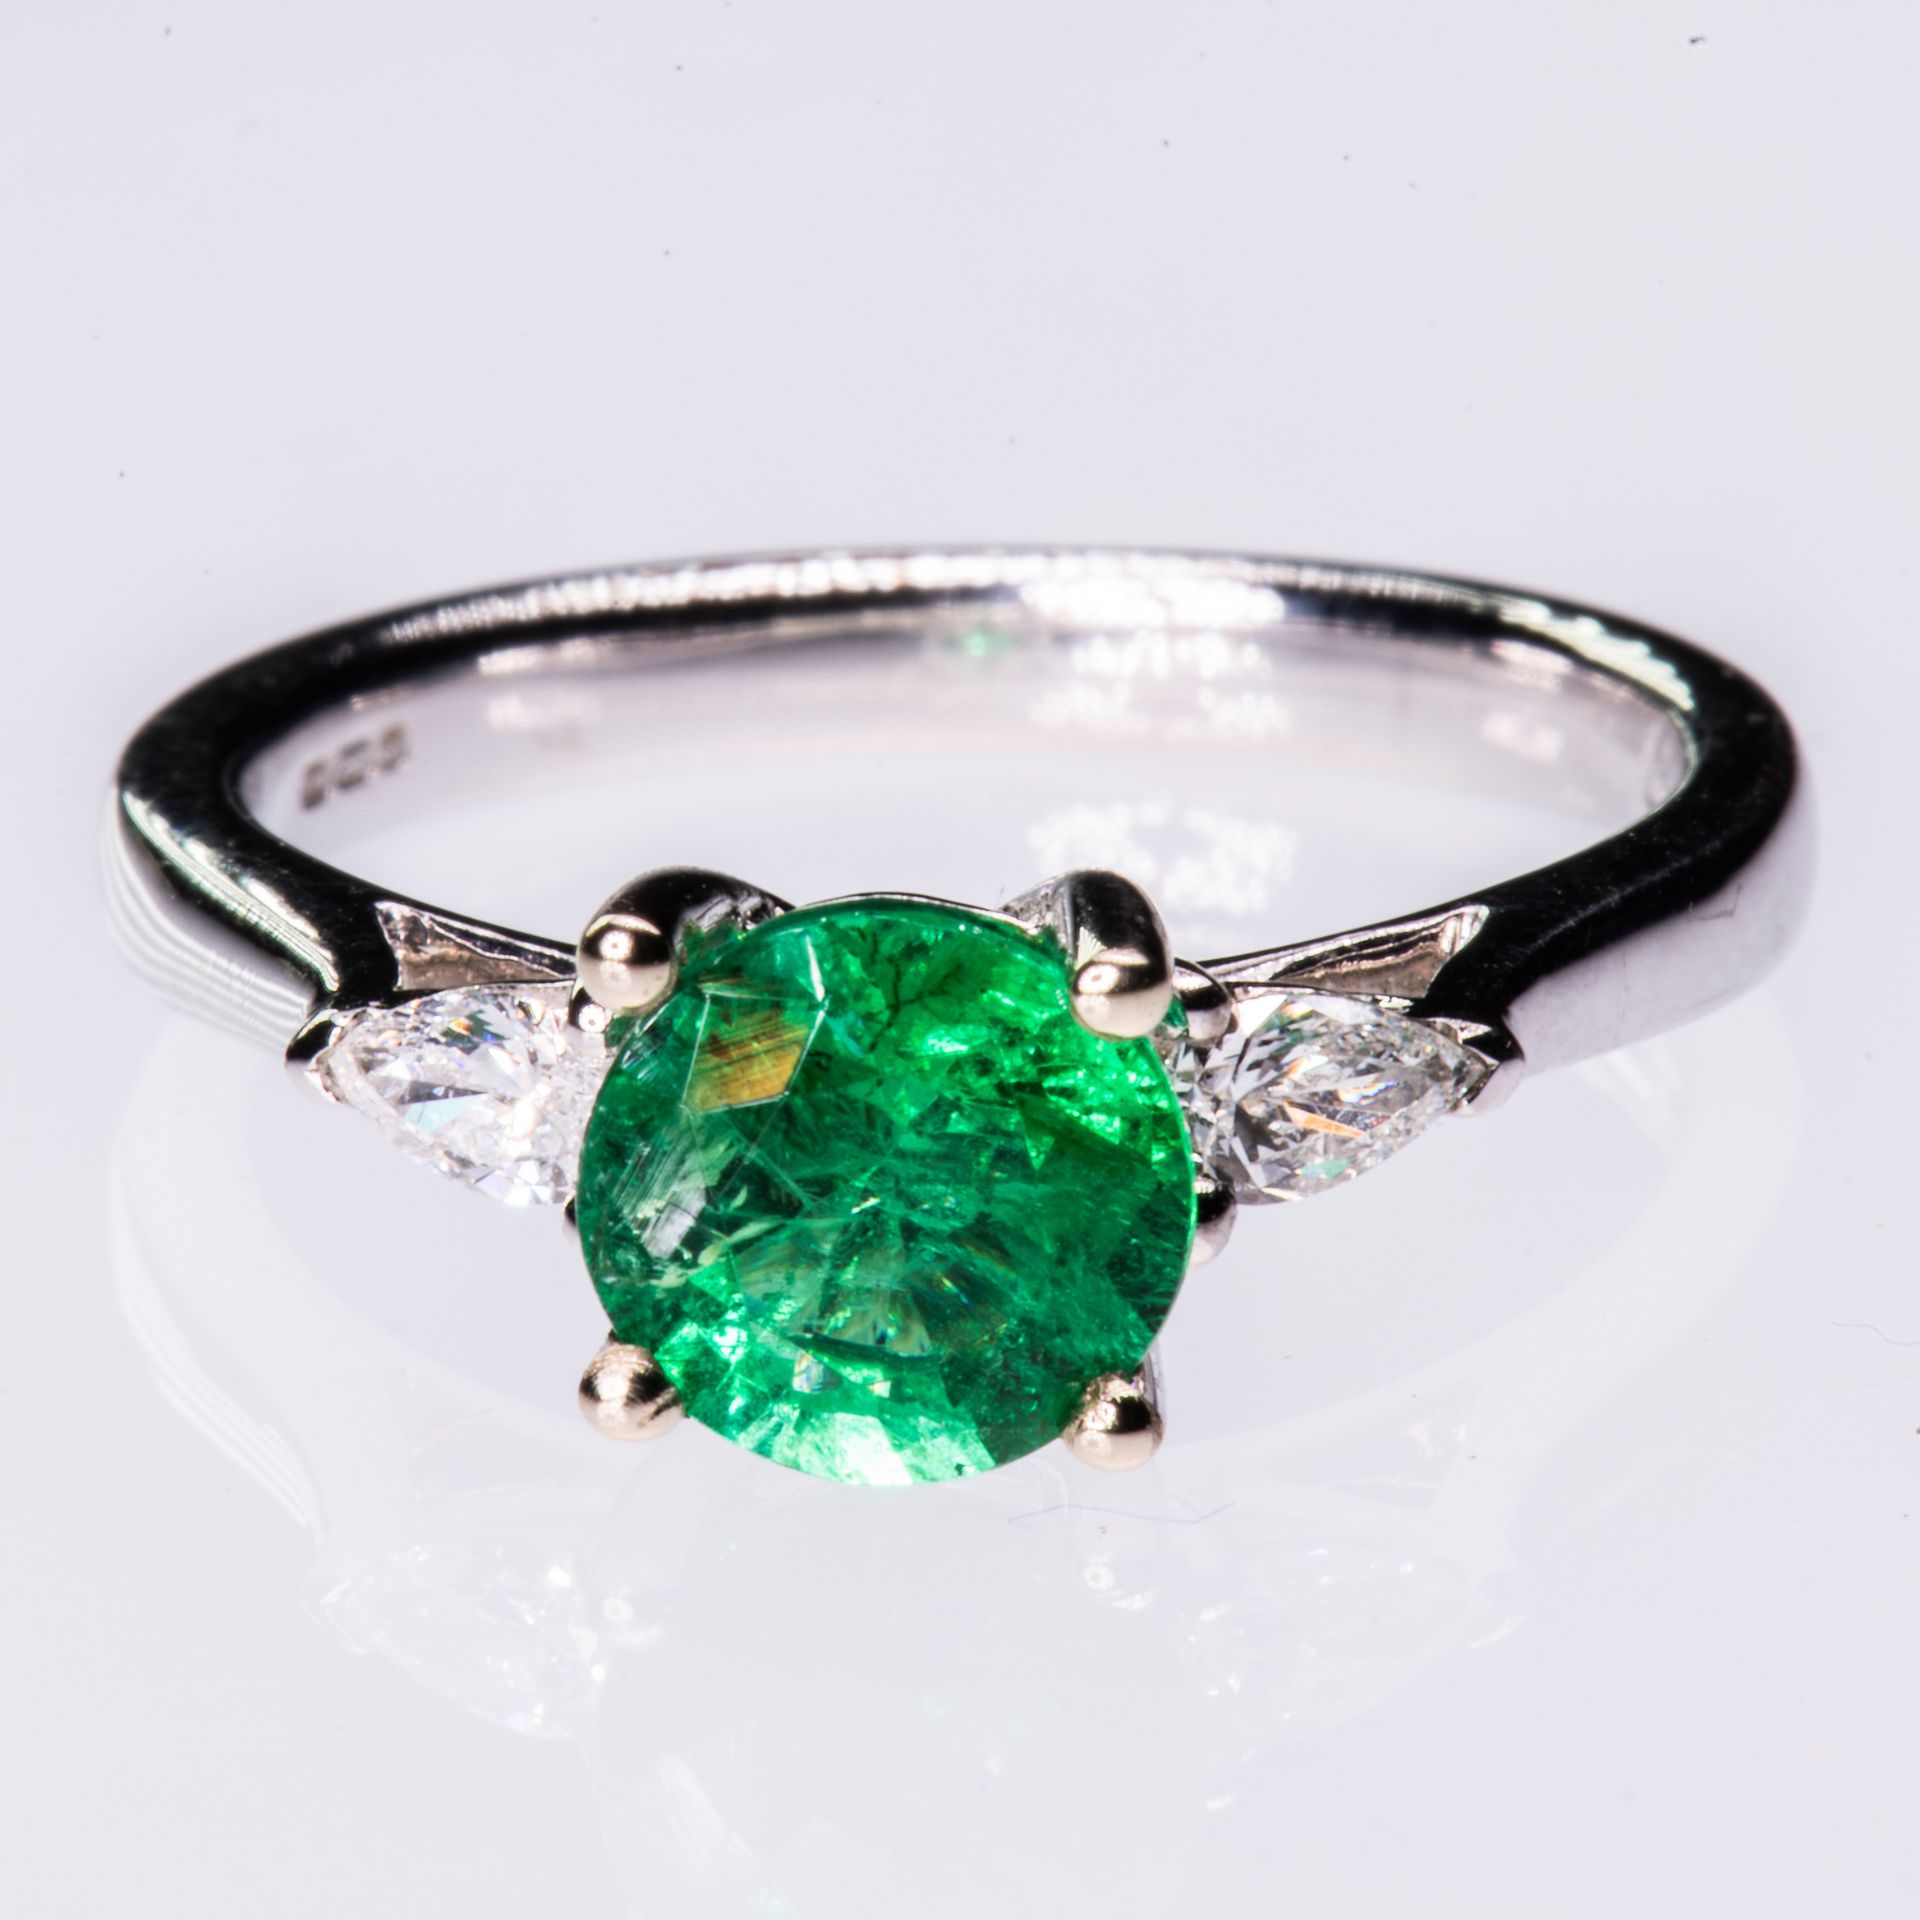 AN 18CT WHITE GOLD EMERALD AND DIAMOND RING